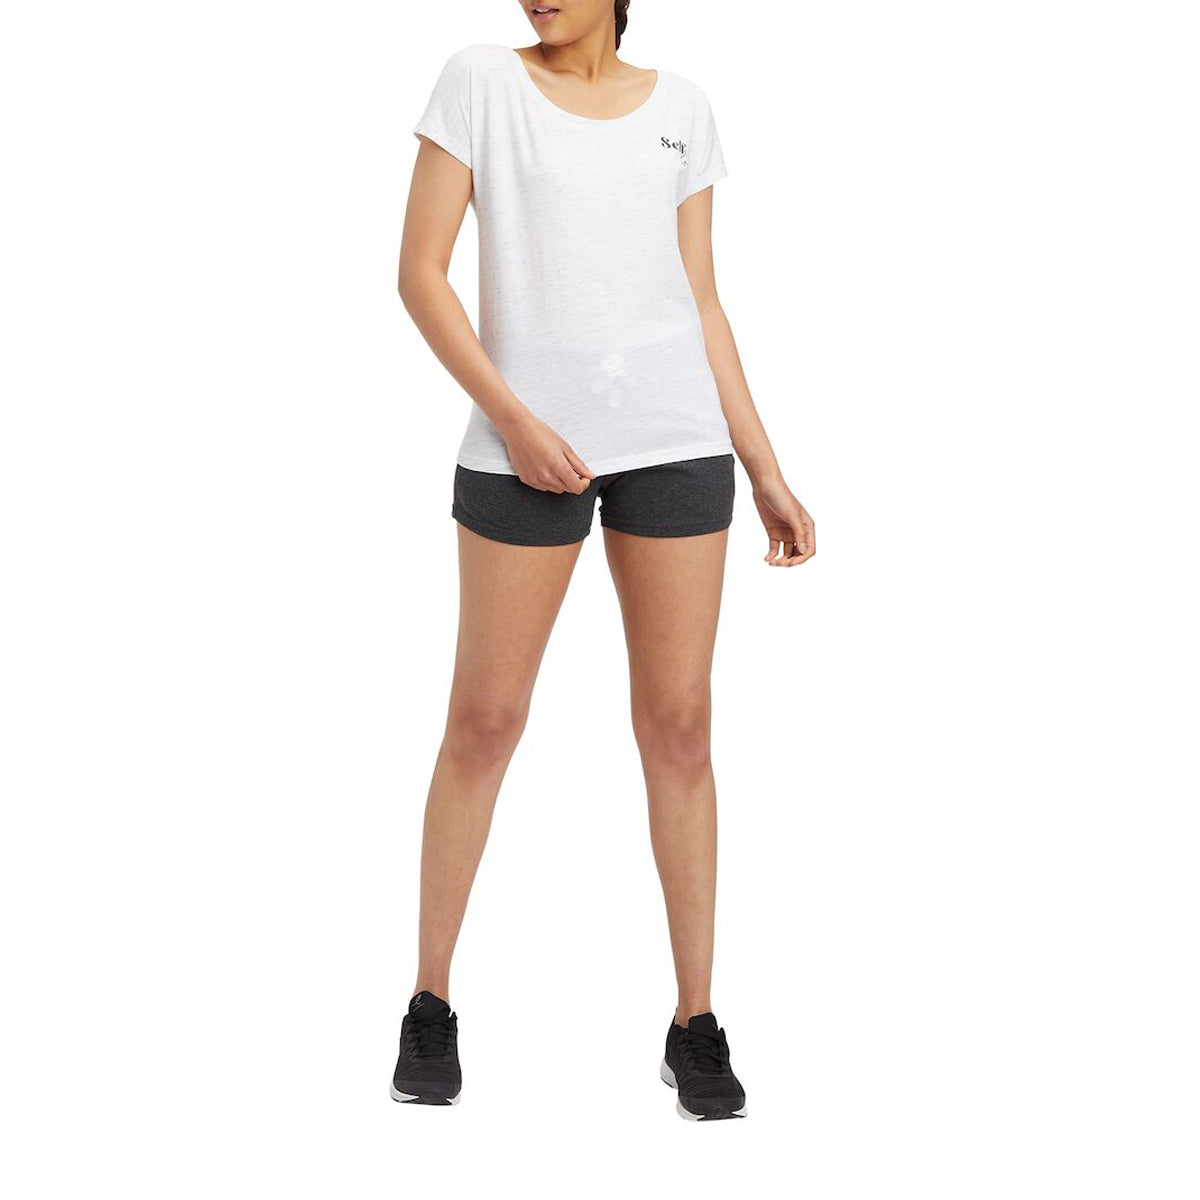 Energetics Cully Lifestyle T-Shirt For Women, White